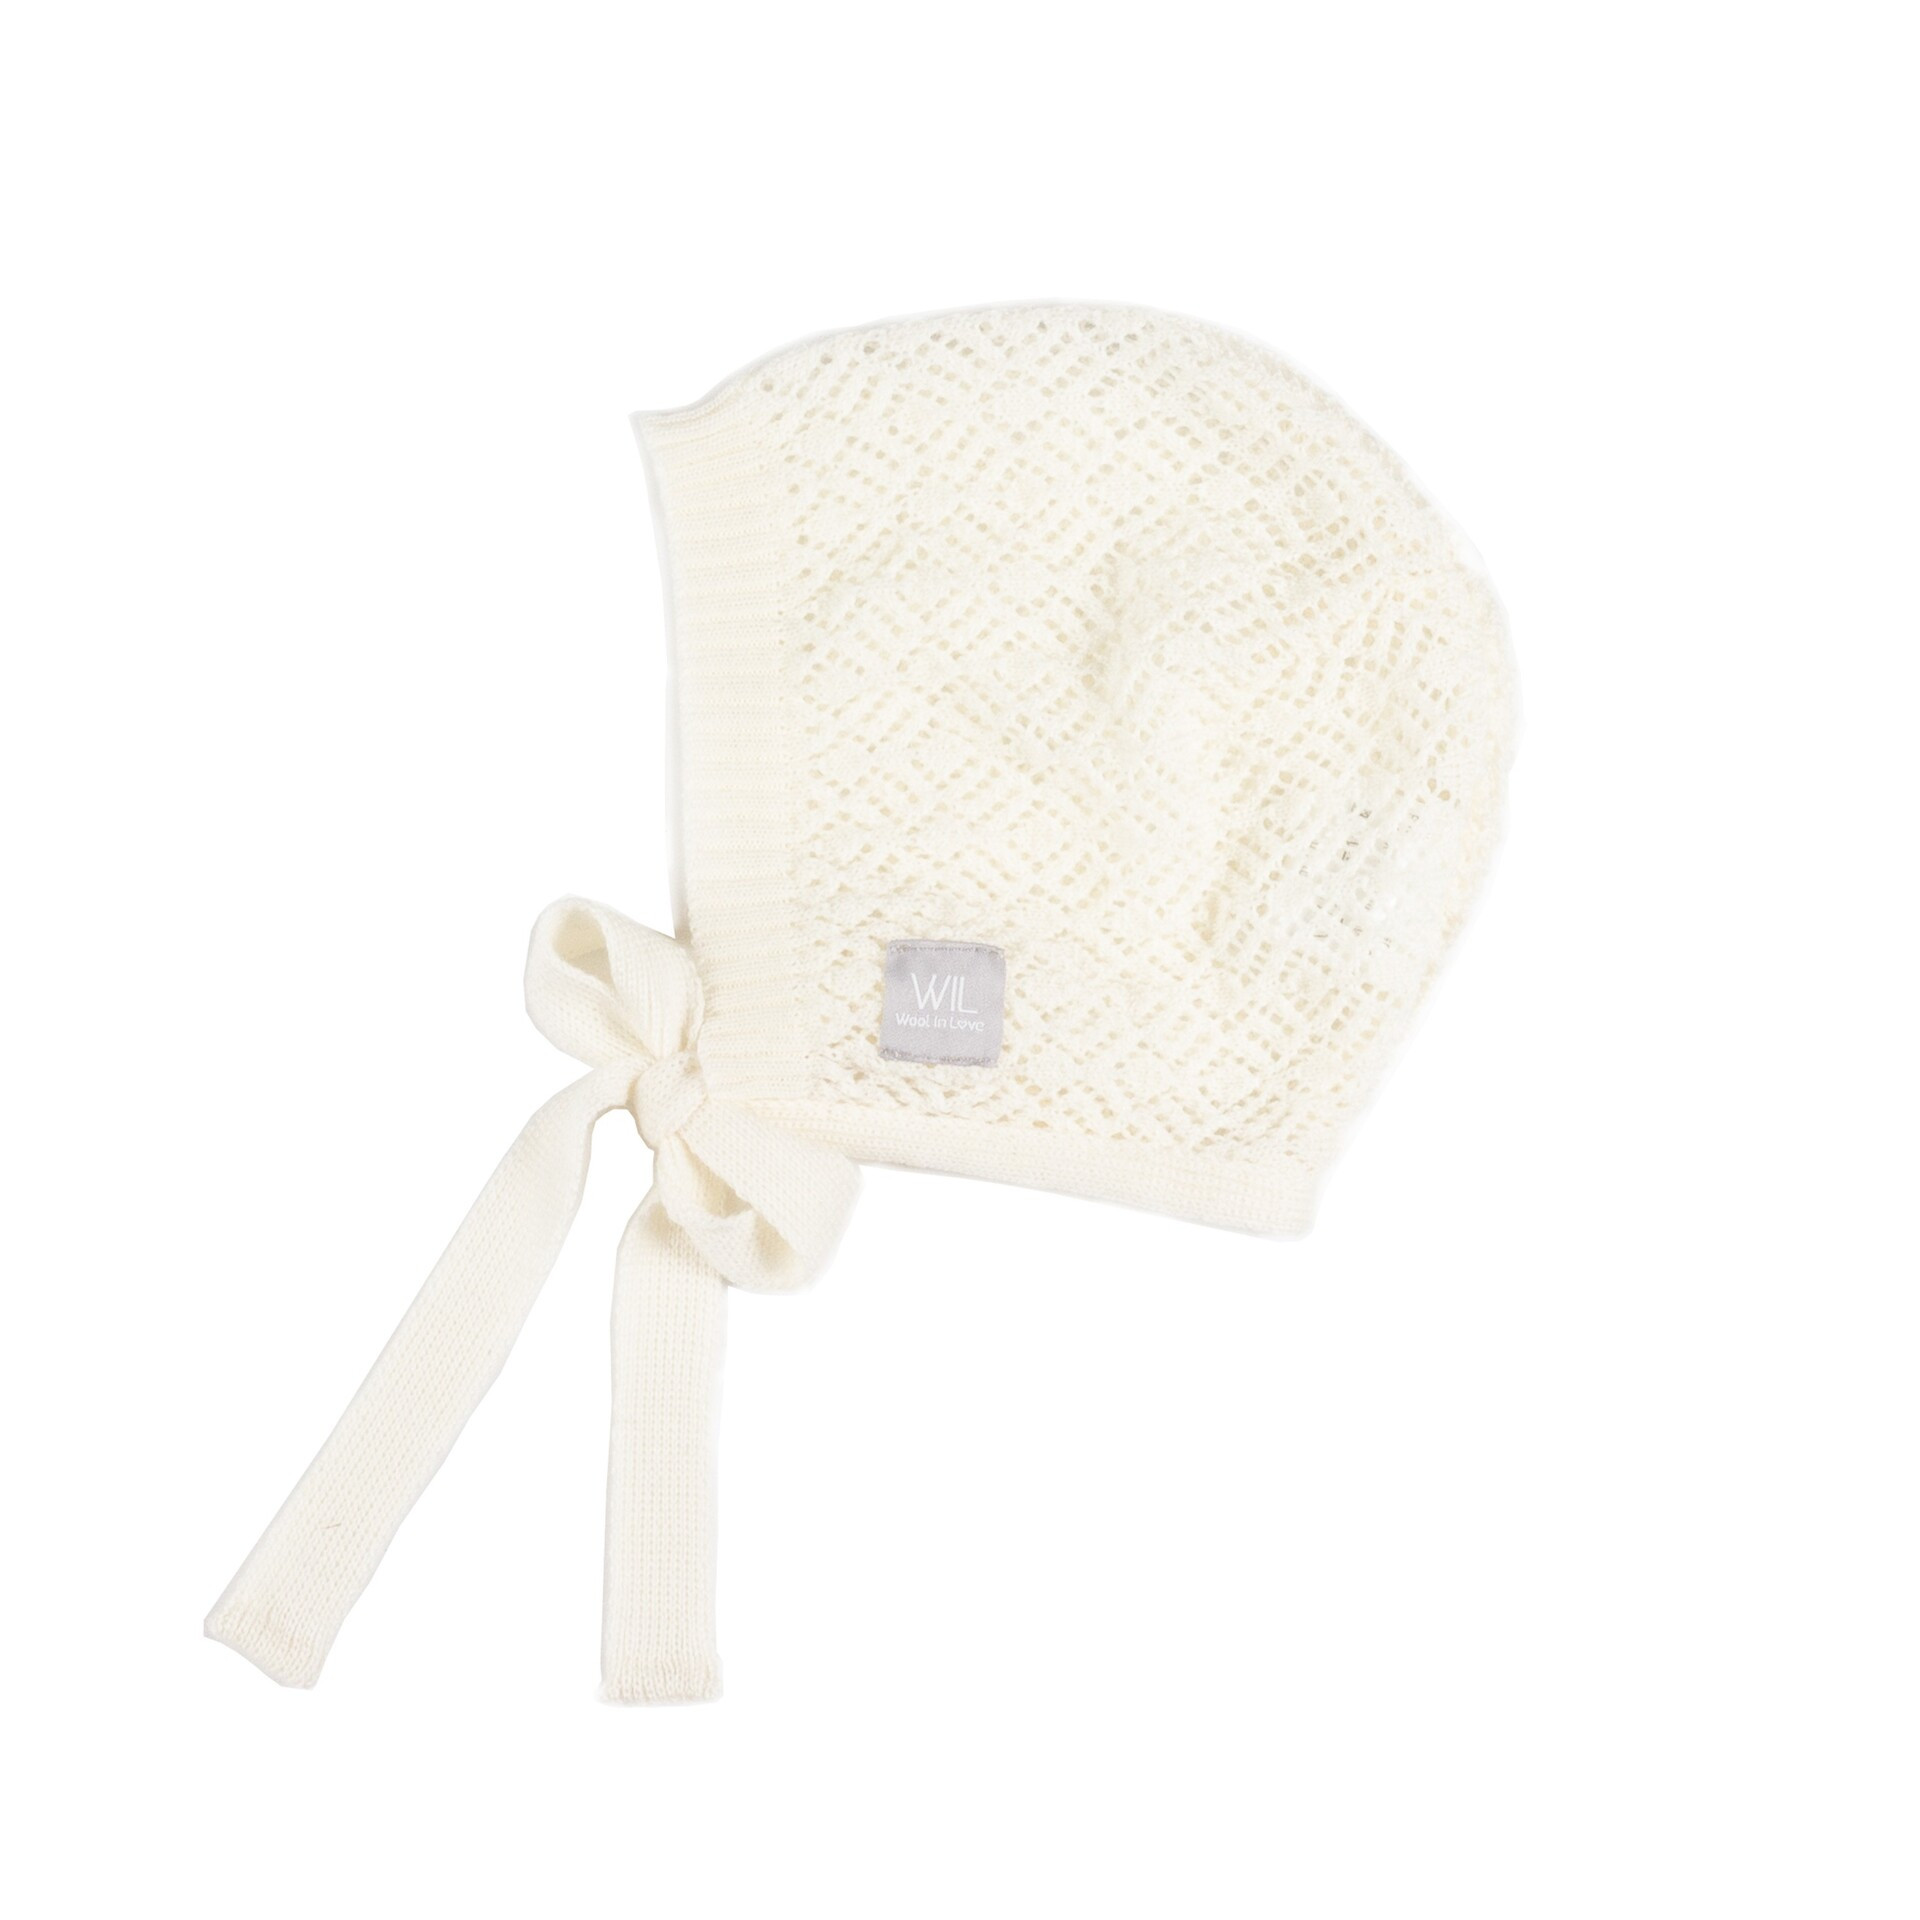 Especially delicate and tender pattern bonne hat for your newborn. A beautiful light bonnet covers the ears for extra warmth.